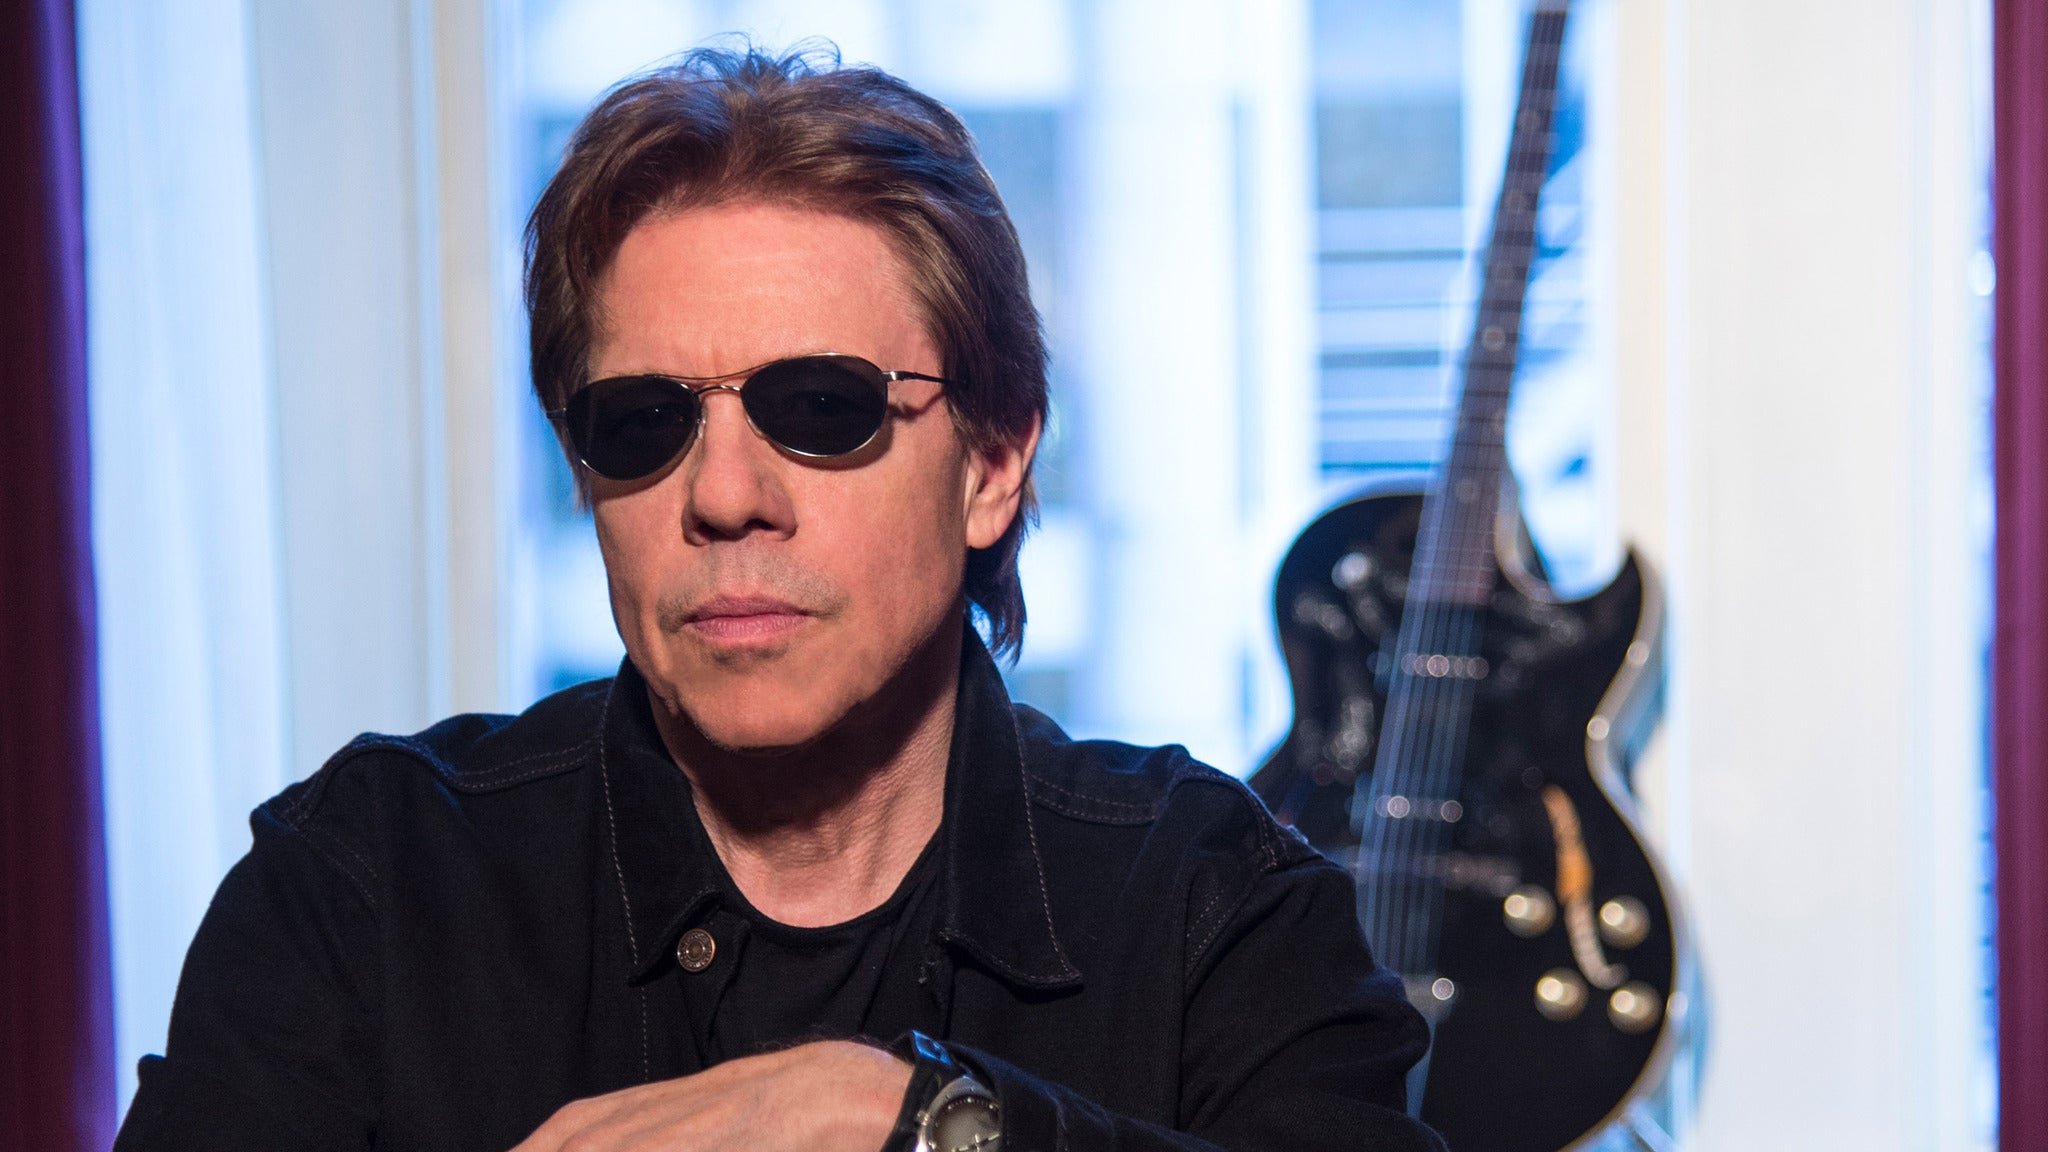 George Thorogood Good To Be Bad Tour – 45 Years Of Rock